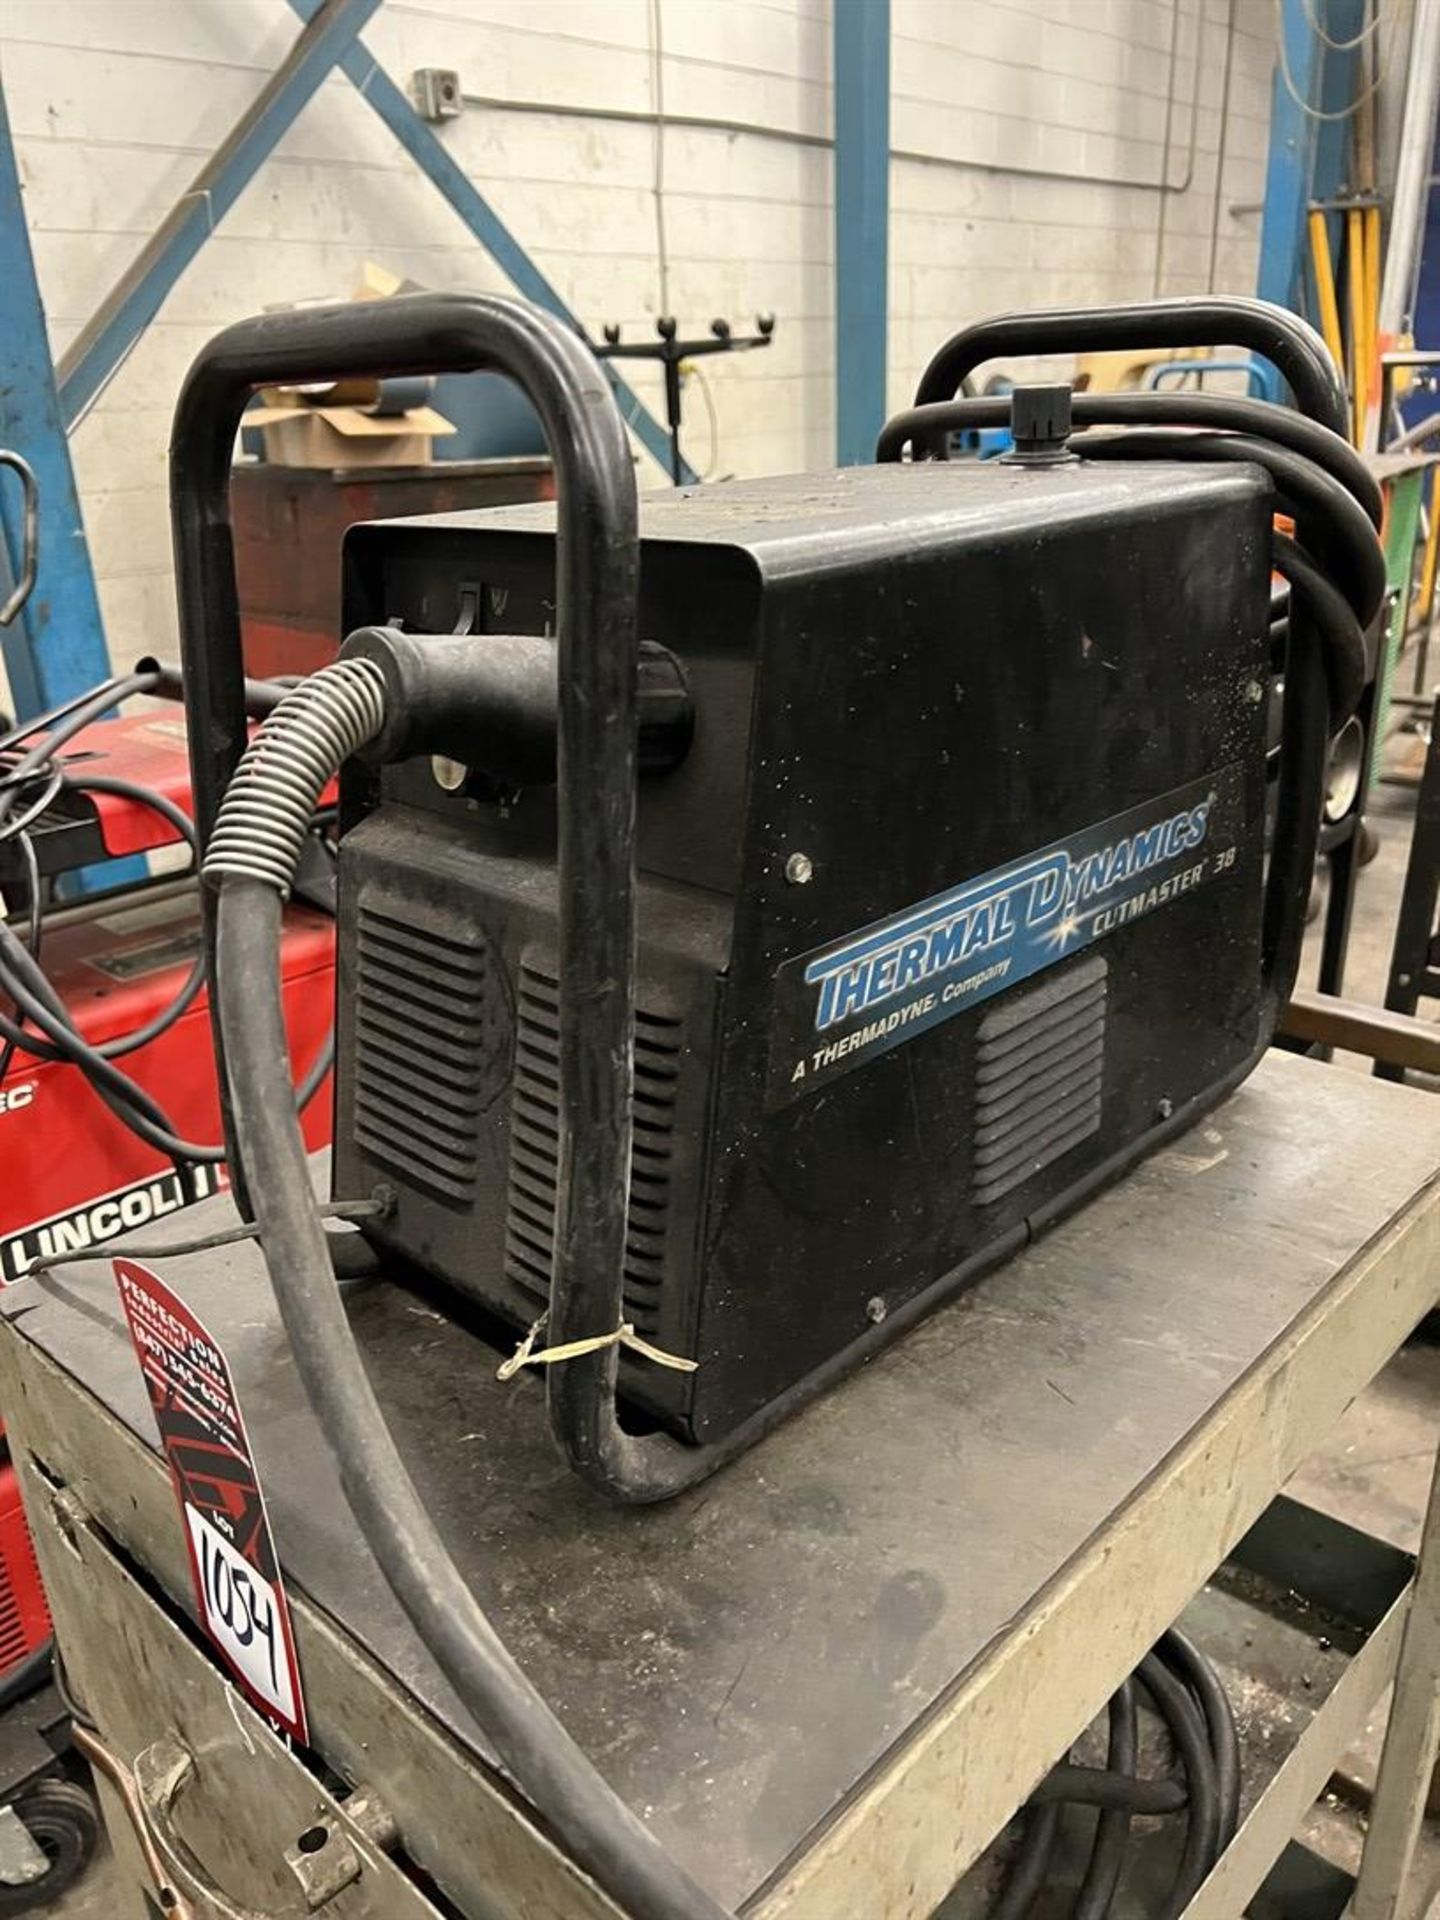 THERMAL DYNAMICS Cutmaster 38 Plasma Cutter, s/n 02287359 - Image 2 of 4